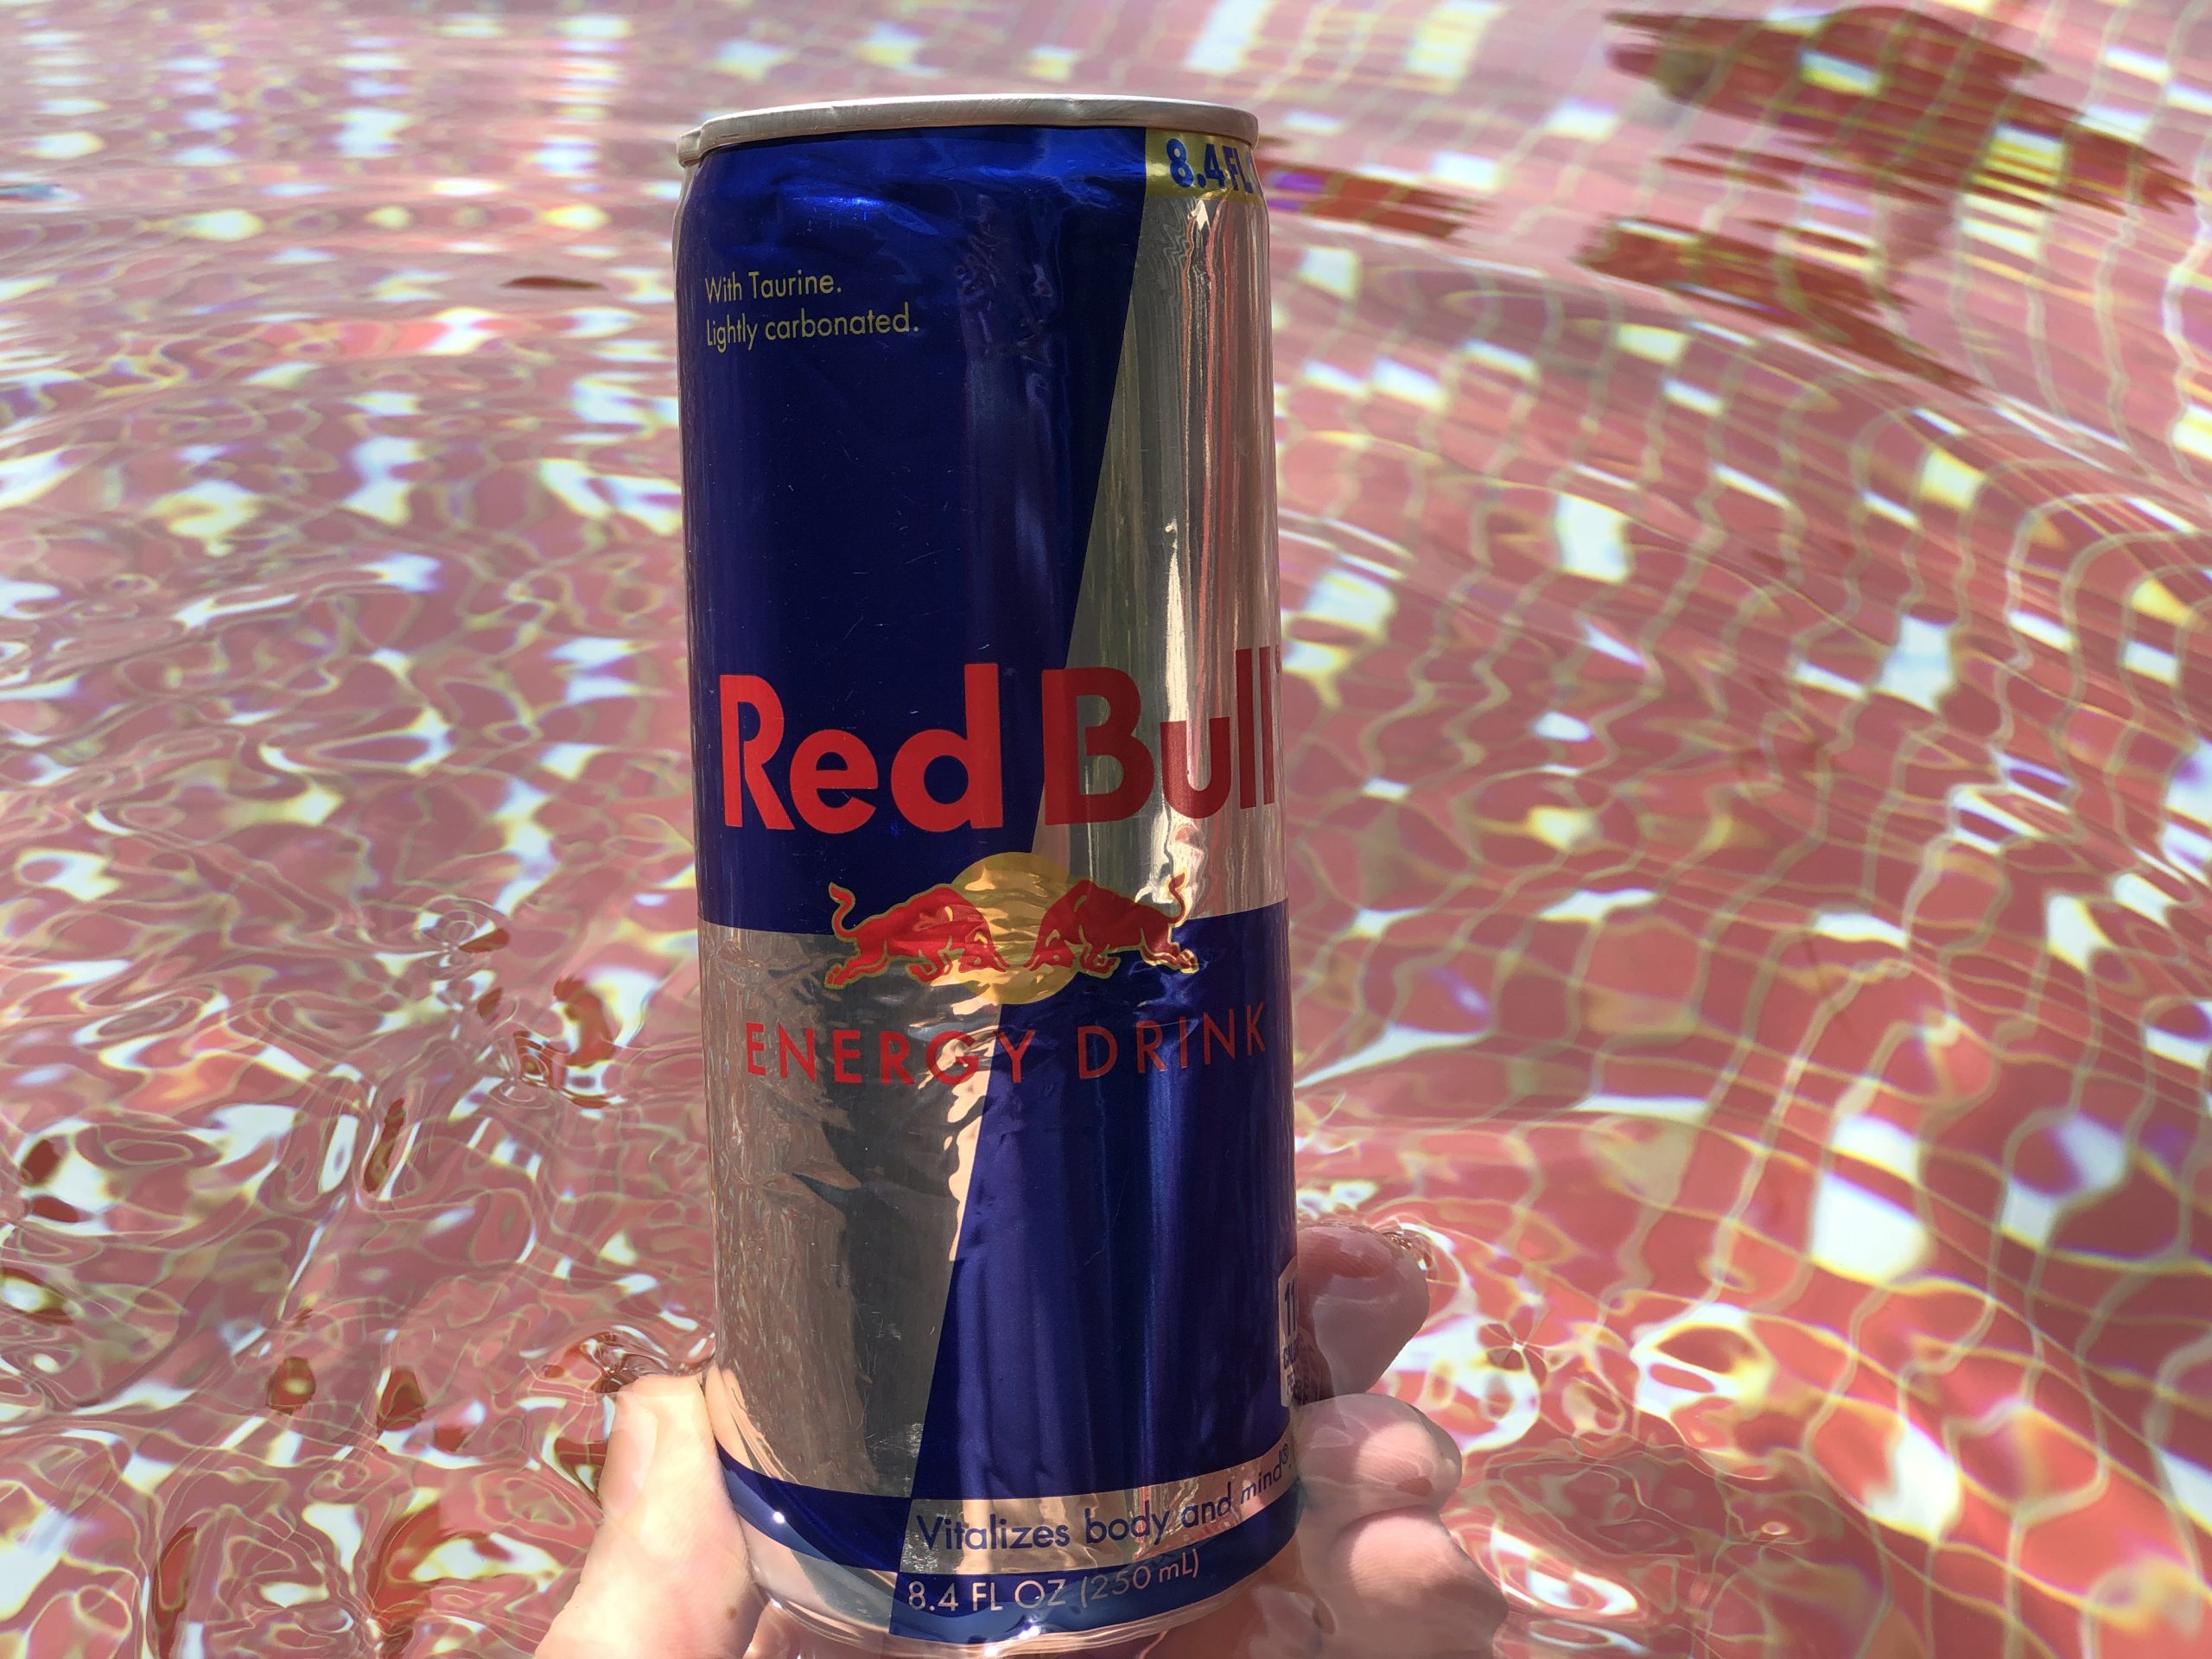 Slette Baby Forføre What Are The Benefits Of Drinking Red Bull? (Facts) – REIZECLUB